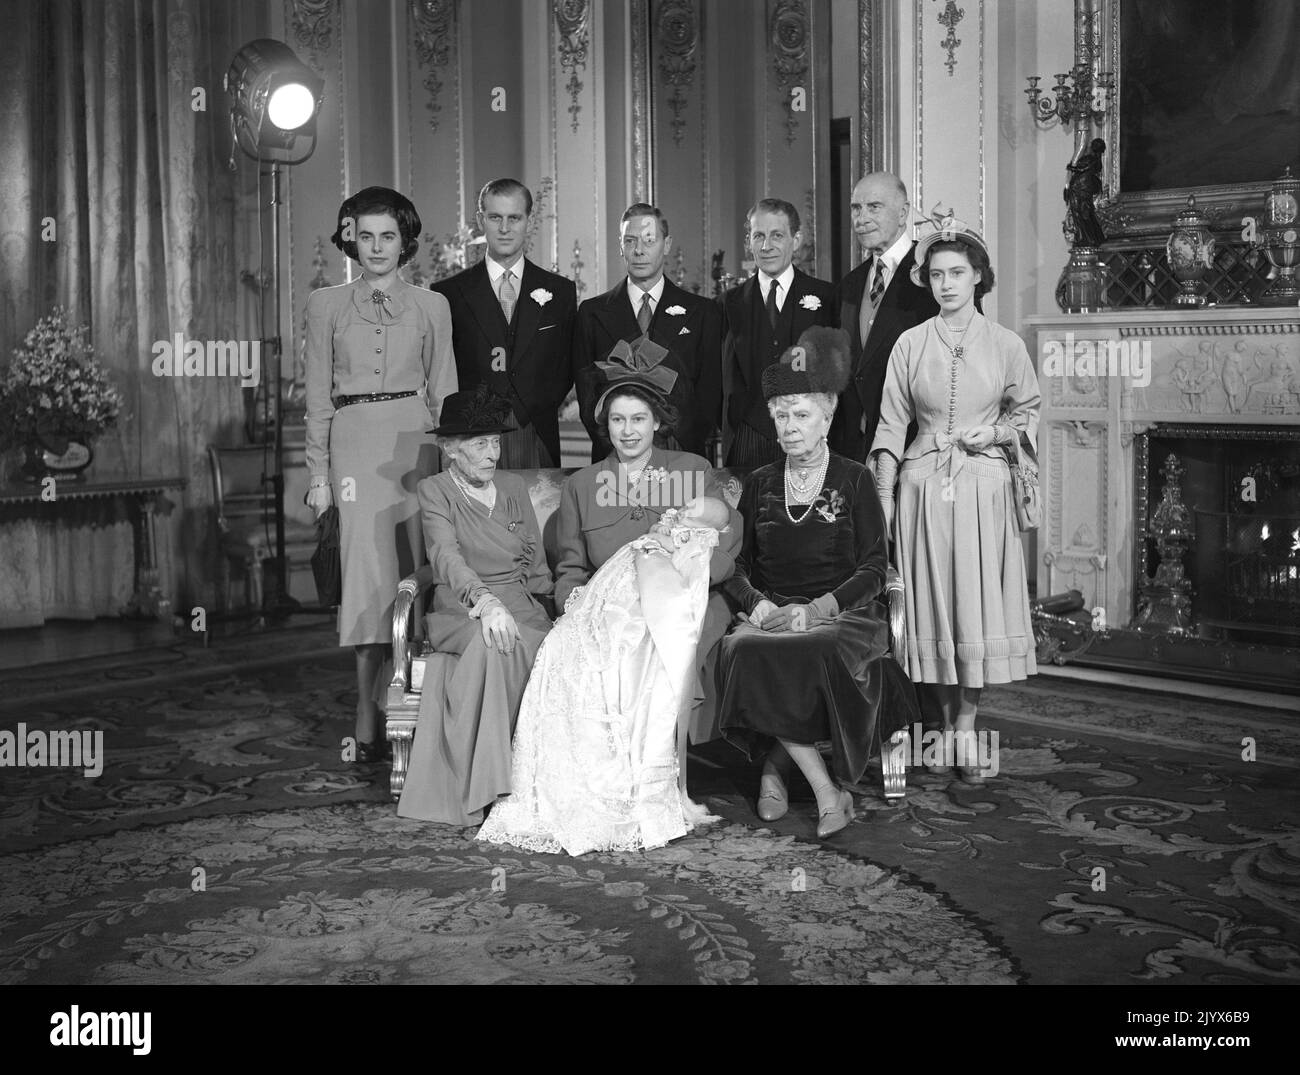 File photo 15/12/1948 of Princess Elizabeth (later Queen Elizabeth II) holding her son, Prince Charles after his christening in Buckingham Palace. With her seated to the left is Dowager Marchioness of Milford Haven, and right is the prince's great grandmother Queen Mary. Godparents standing from left to right; Lady Brabourne, The Duke of Edinburgh (standing proxy for Prince George of Greece), King George VI, David Bowes-Lyon, the Earl of Athlone (who stood proxy for the King of Norway) and Princess Margaret. The Queen died peacefully at Balmoral this afternoon, Buckingham Palace has announced. Stock Photo